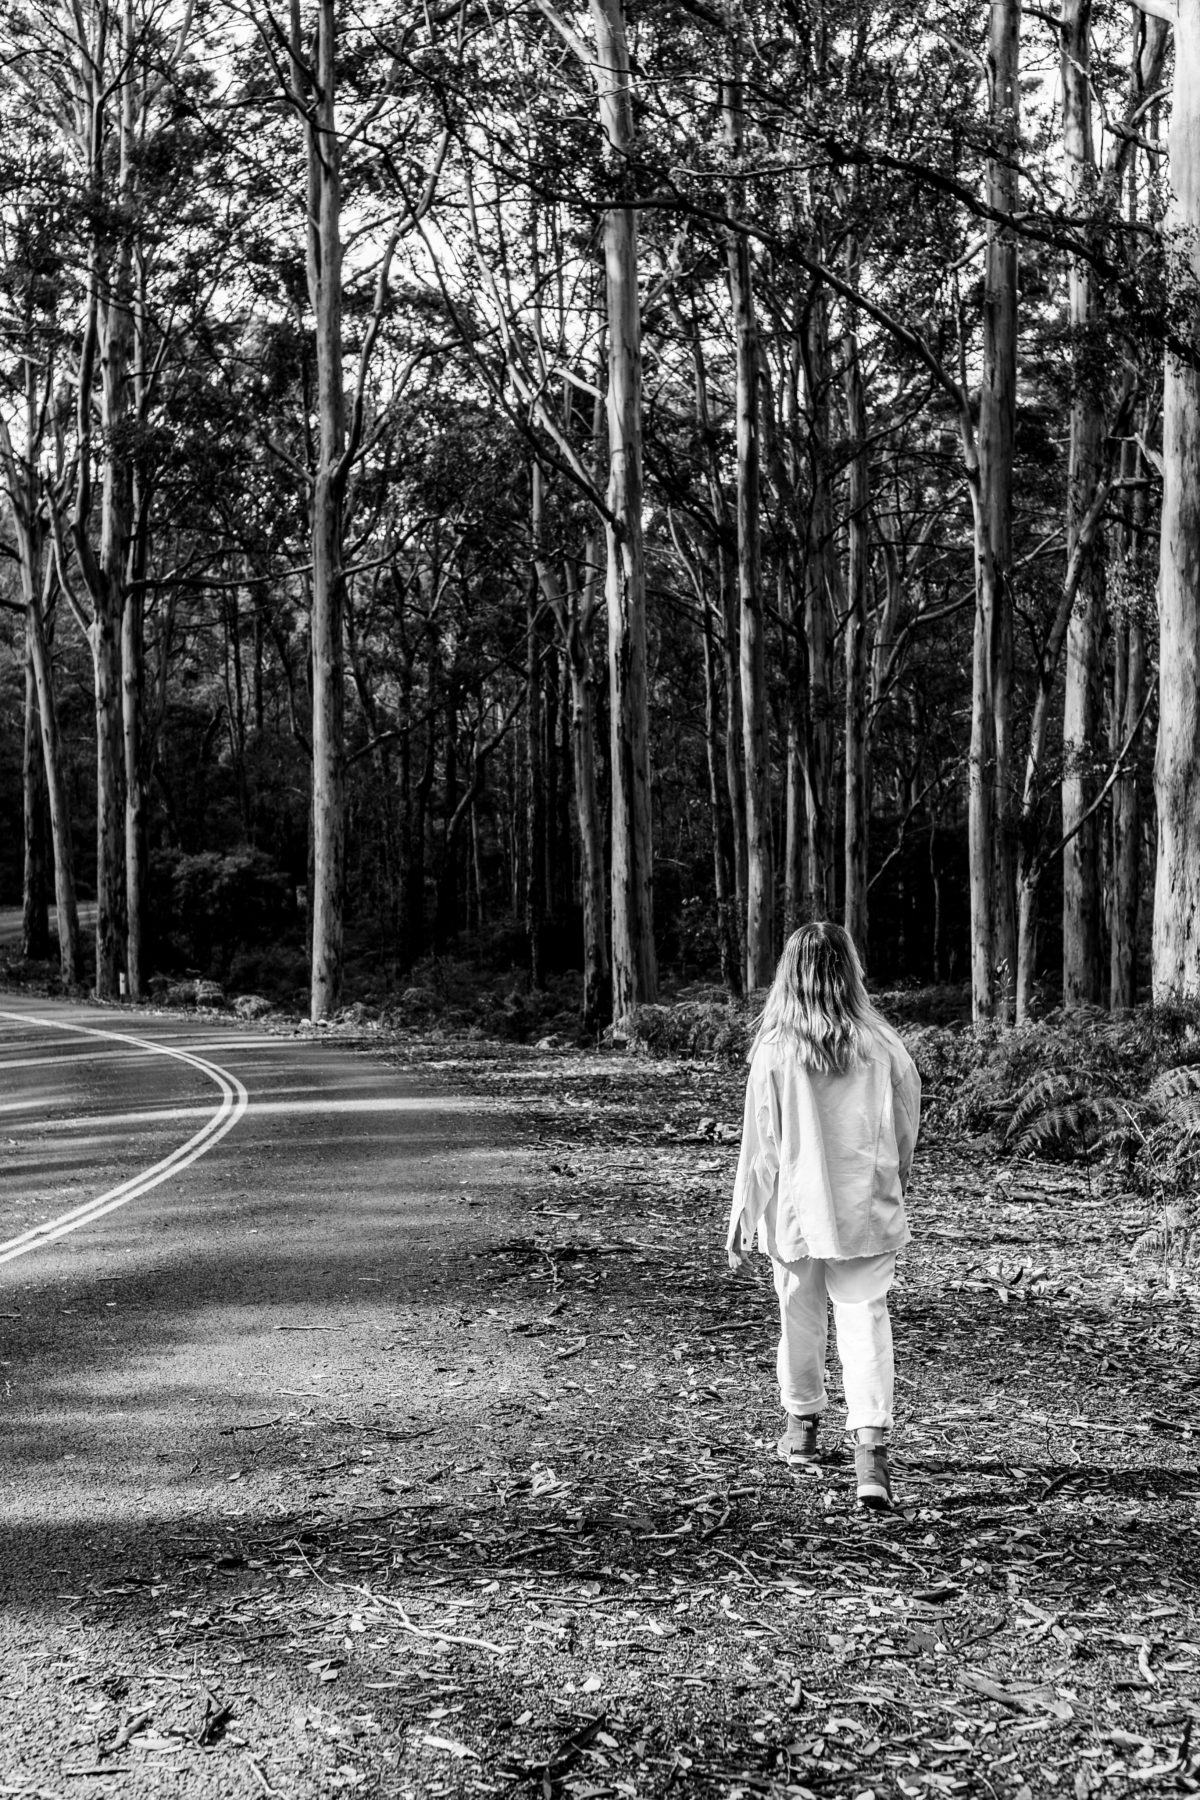 woman wearing white pants and top walking facing away along a road peaceful with mental health benefits of exercise into the trees